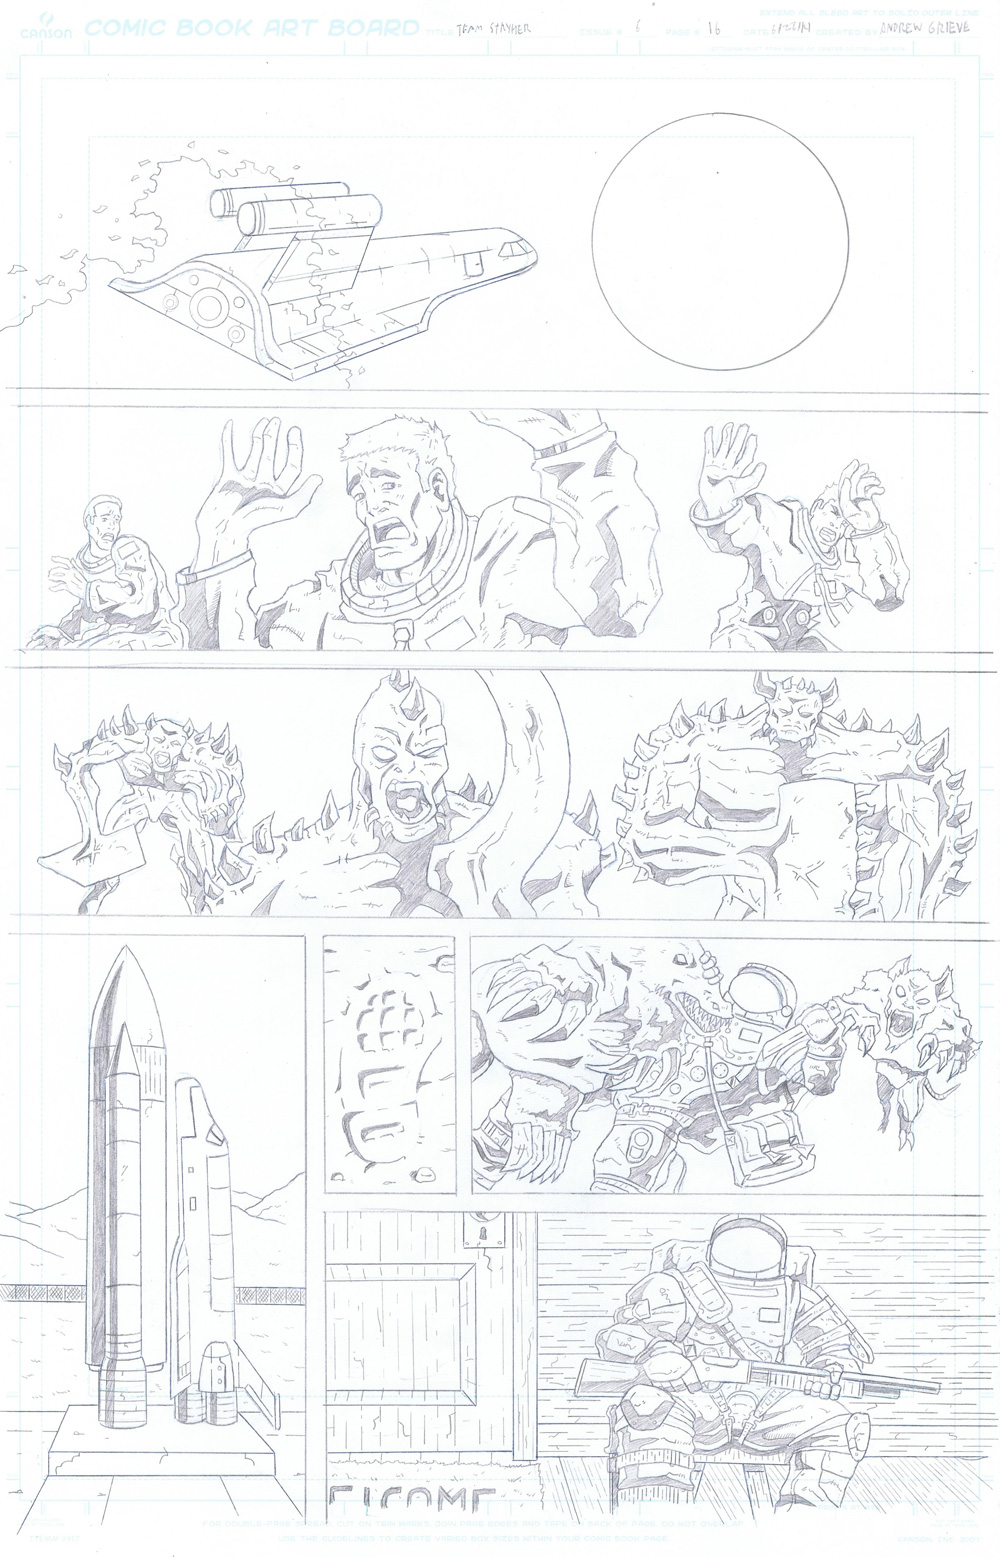 MISSION 006: PAGE 16 PENCIL